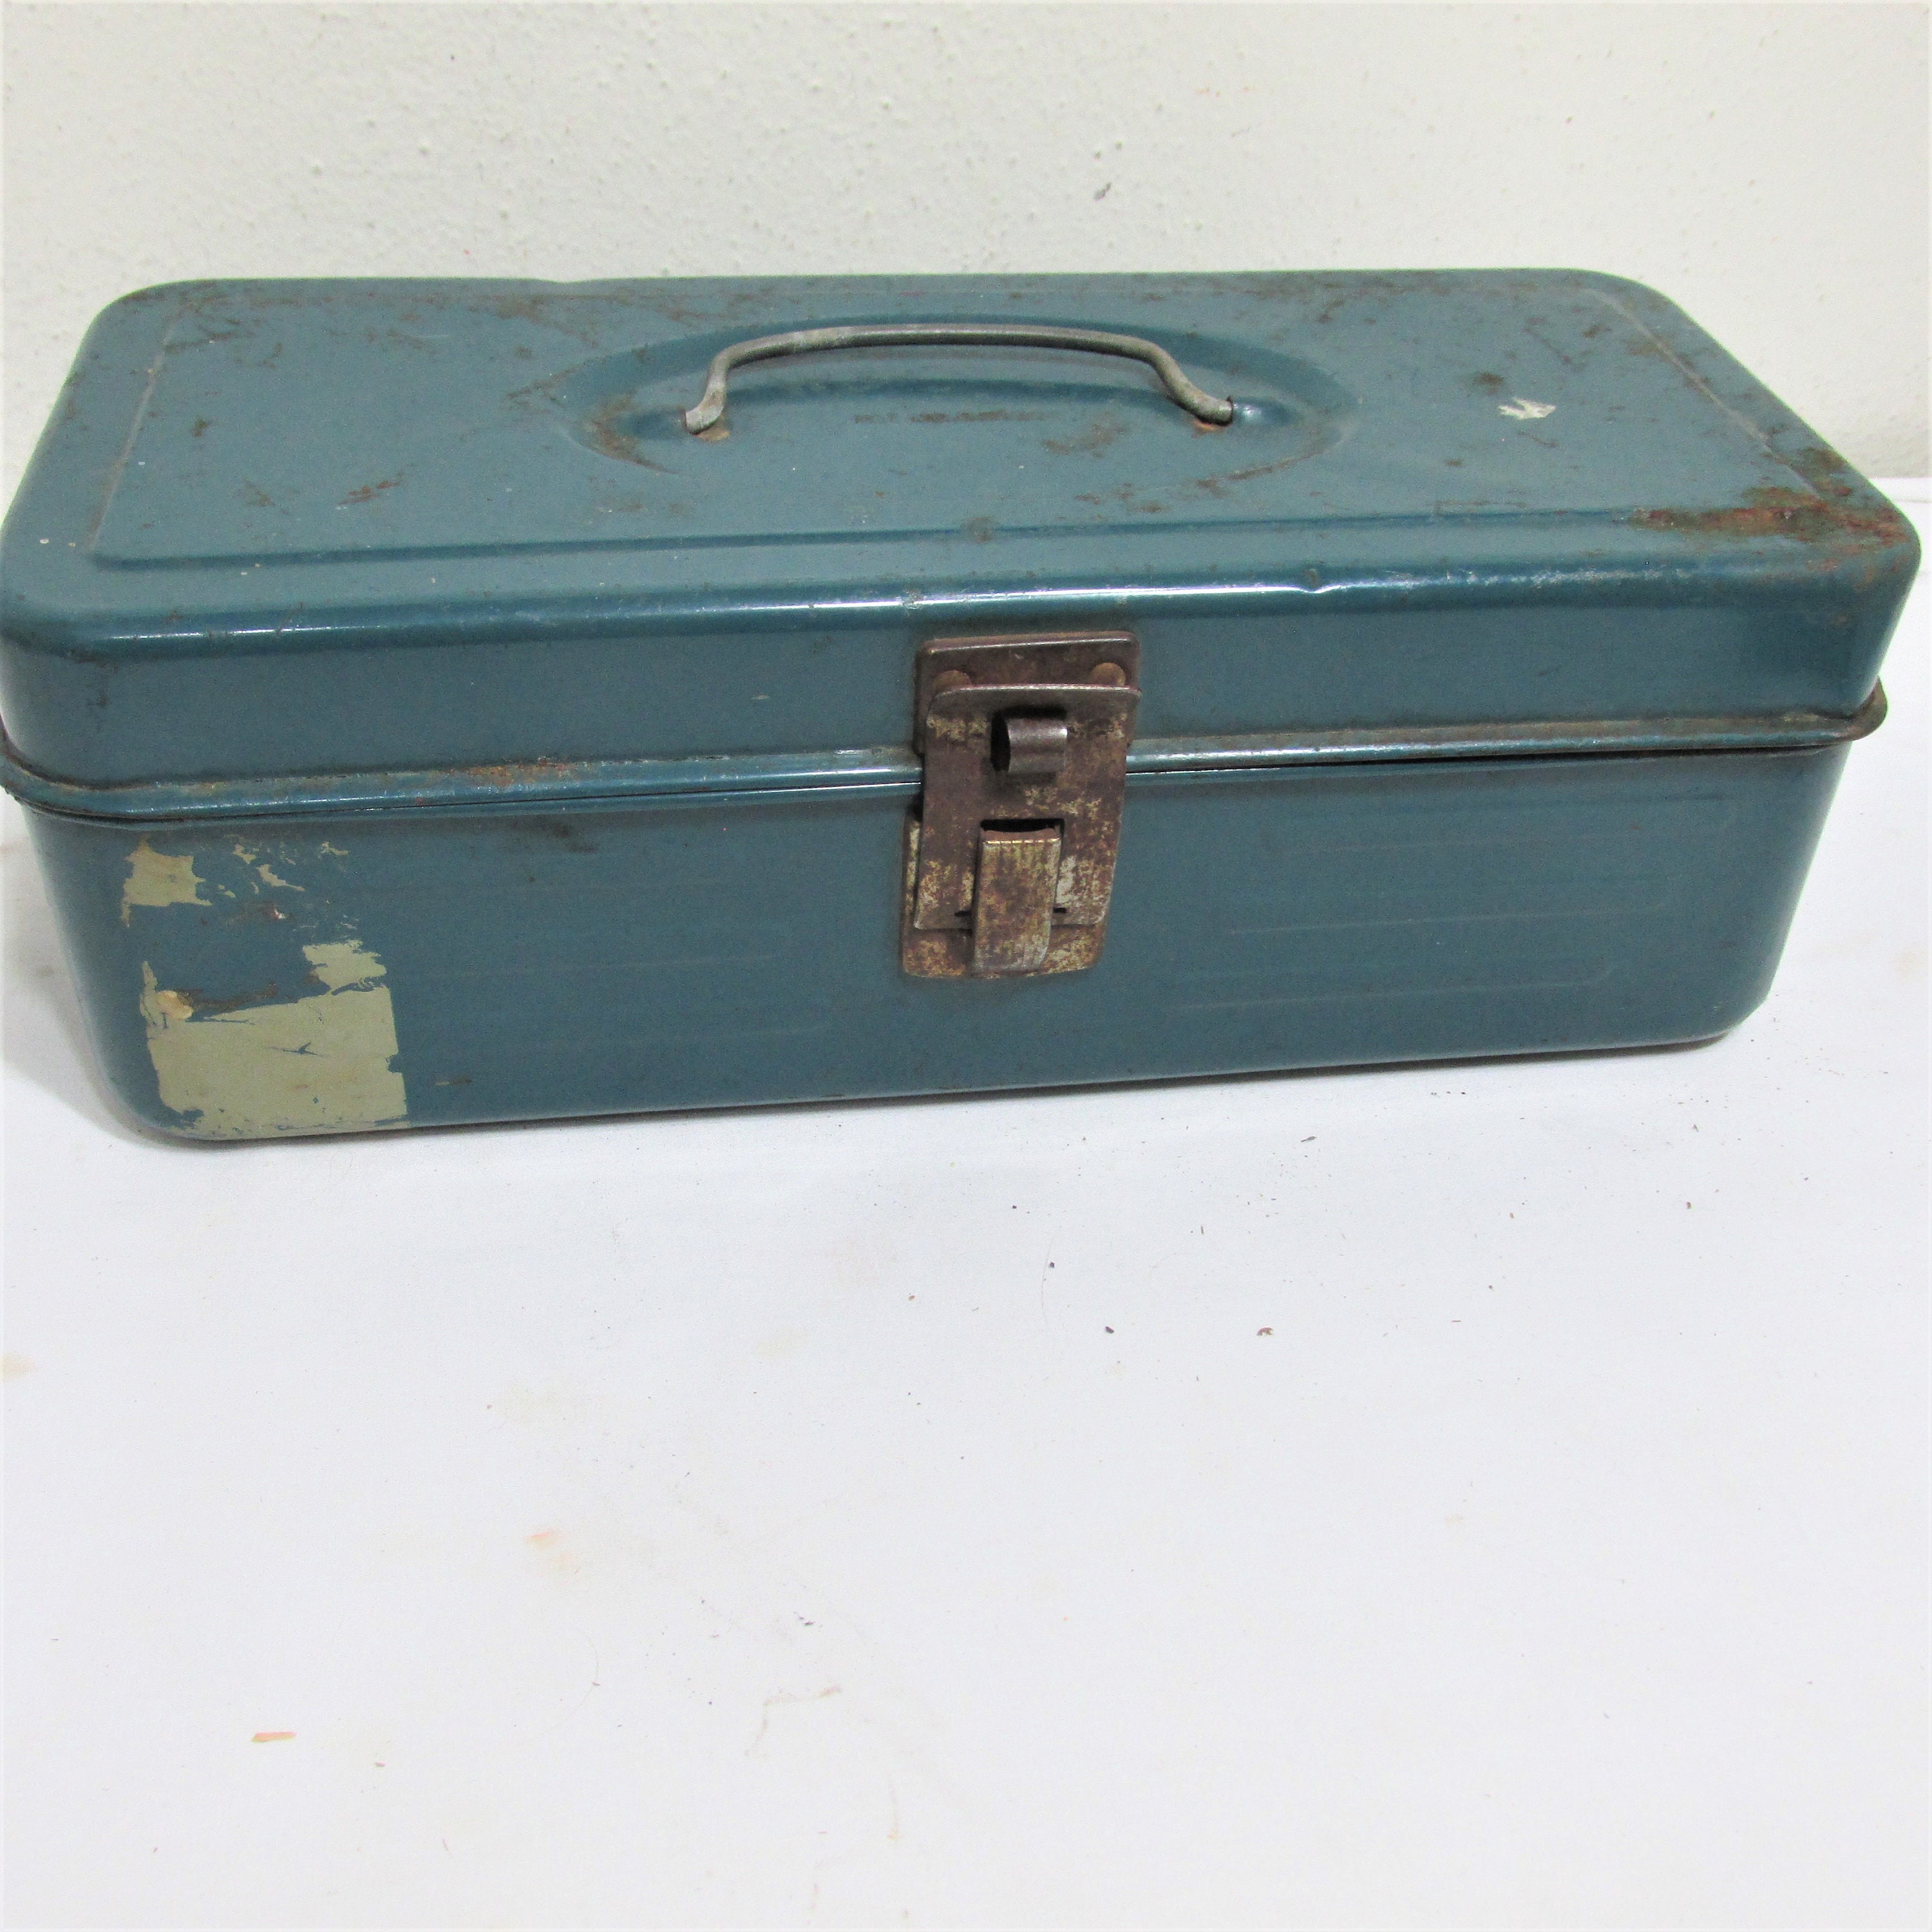 Metal Tackle Box Vintage Rustic Fishing Gear Craft Supply Container